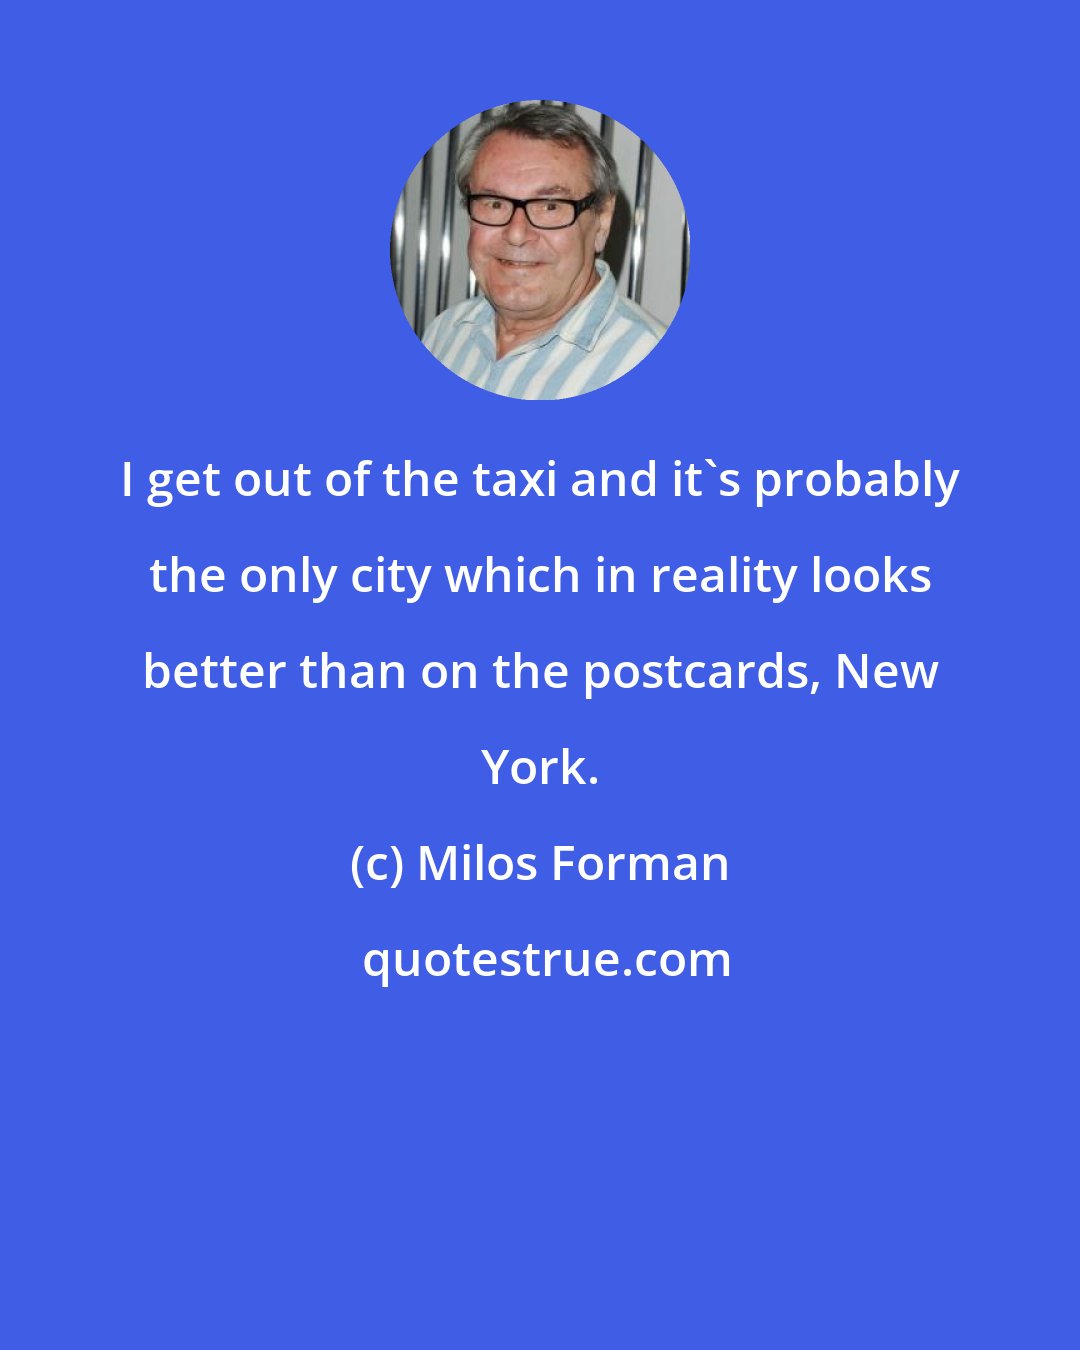 Milos Forman: I get out of the taxi and it's probably the only city which in reality looks better than on the postcards, New York.